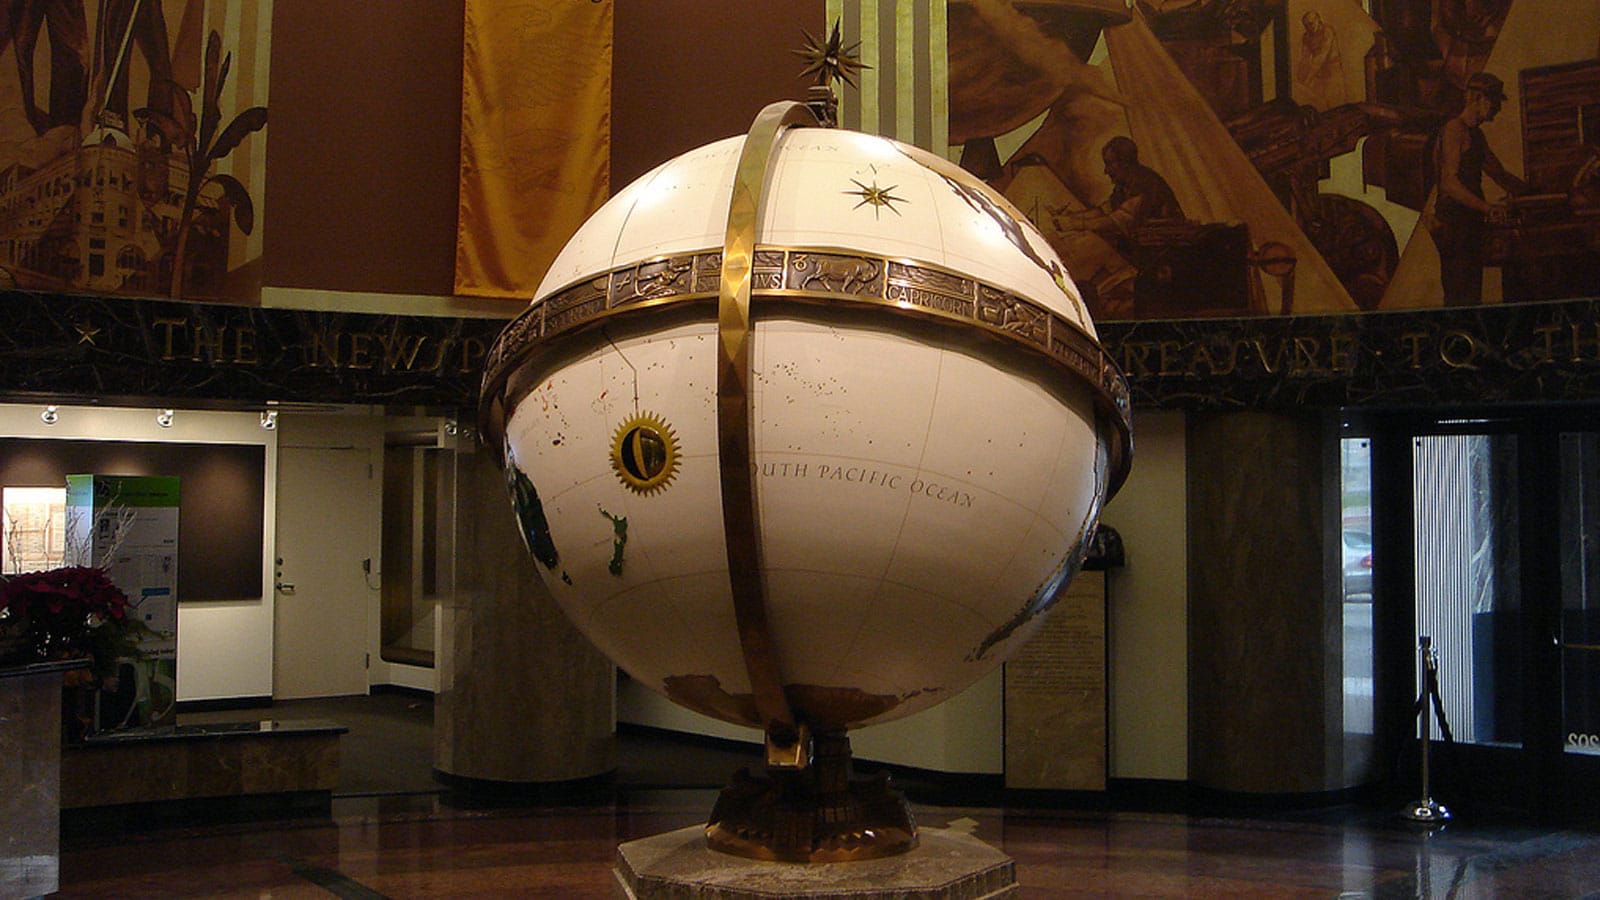 The giant aluminum globe in the lobby of the LA Times building downtown, Hugo Ballin murals in the background; 1930s visions of peace and prosperity